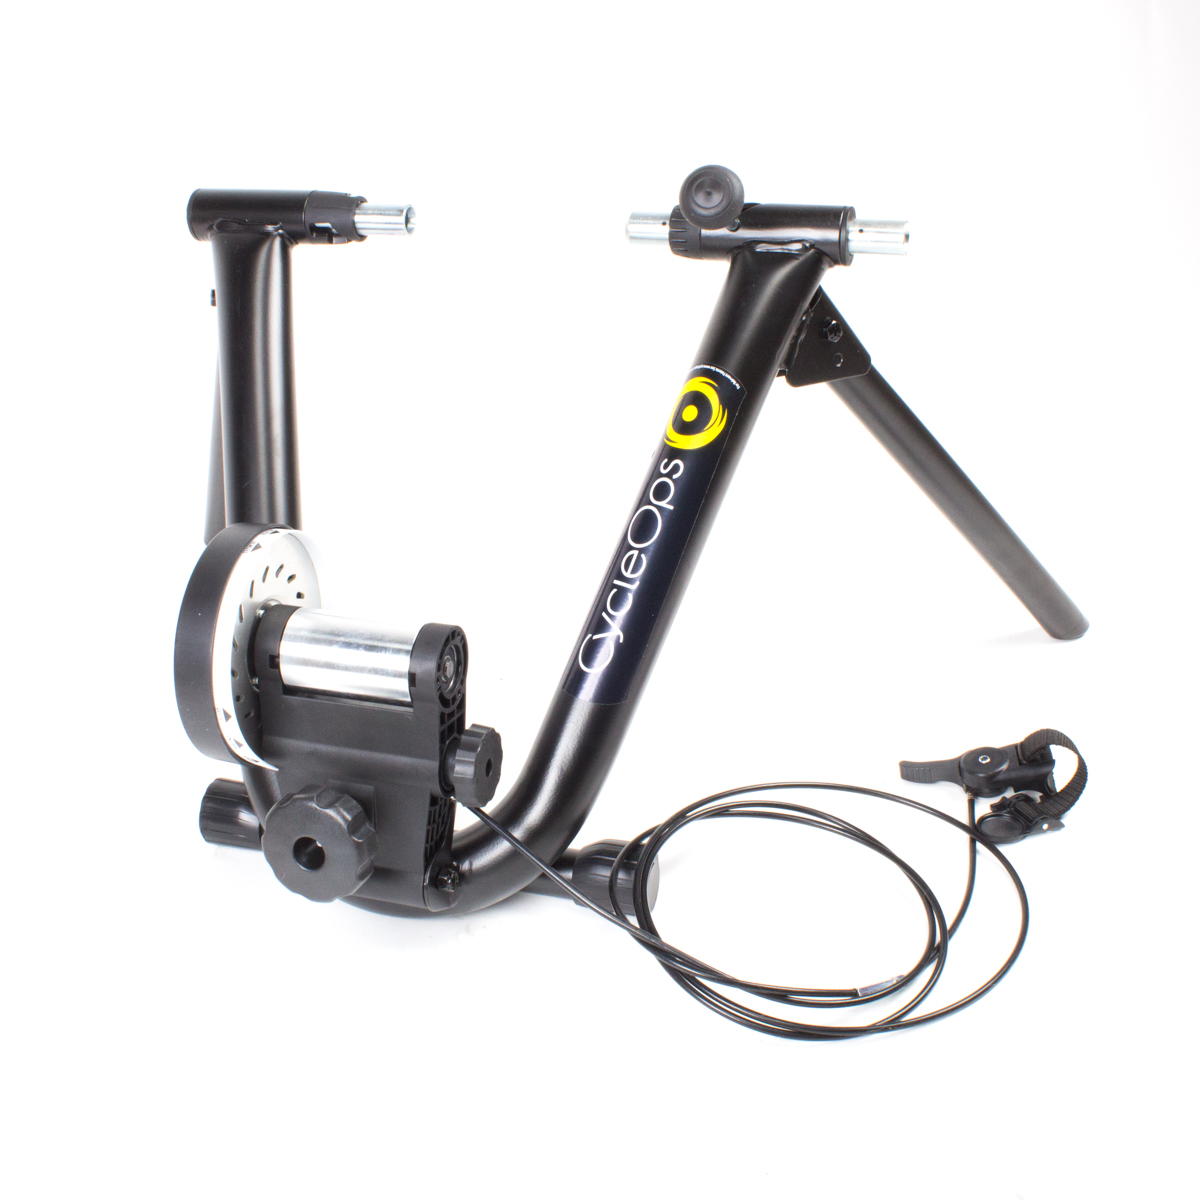 CycleOps Mag+ Indoor Cycling Trainer with Remote 695638323746 - 8B NC CC1225 1